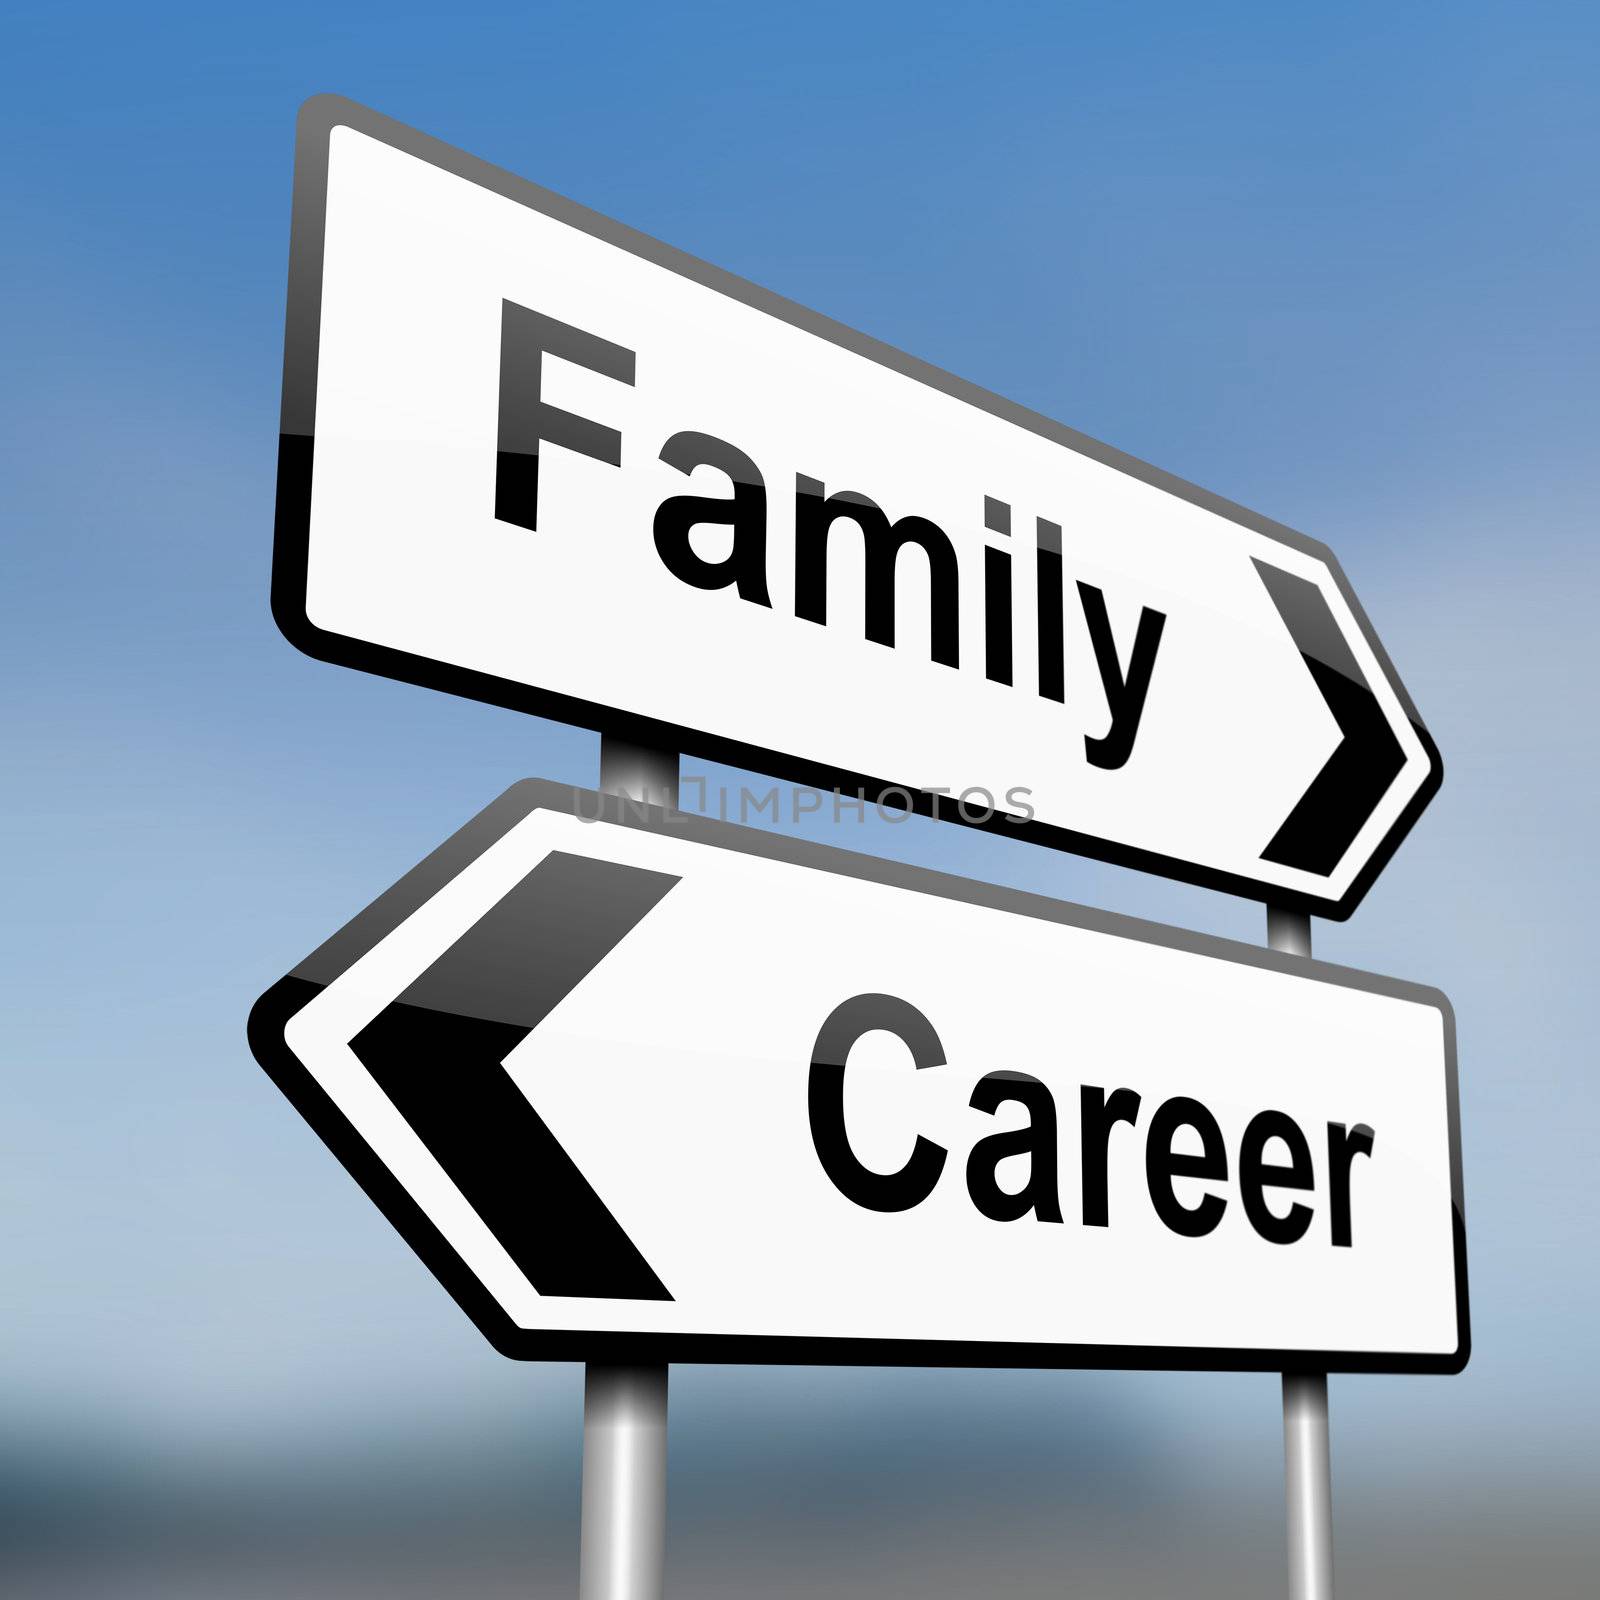 Family or career. by 72soul